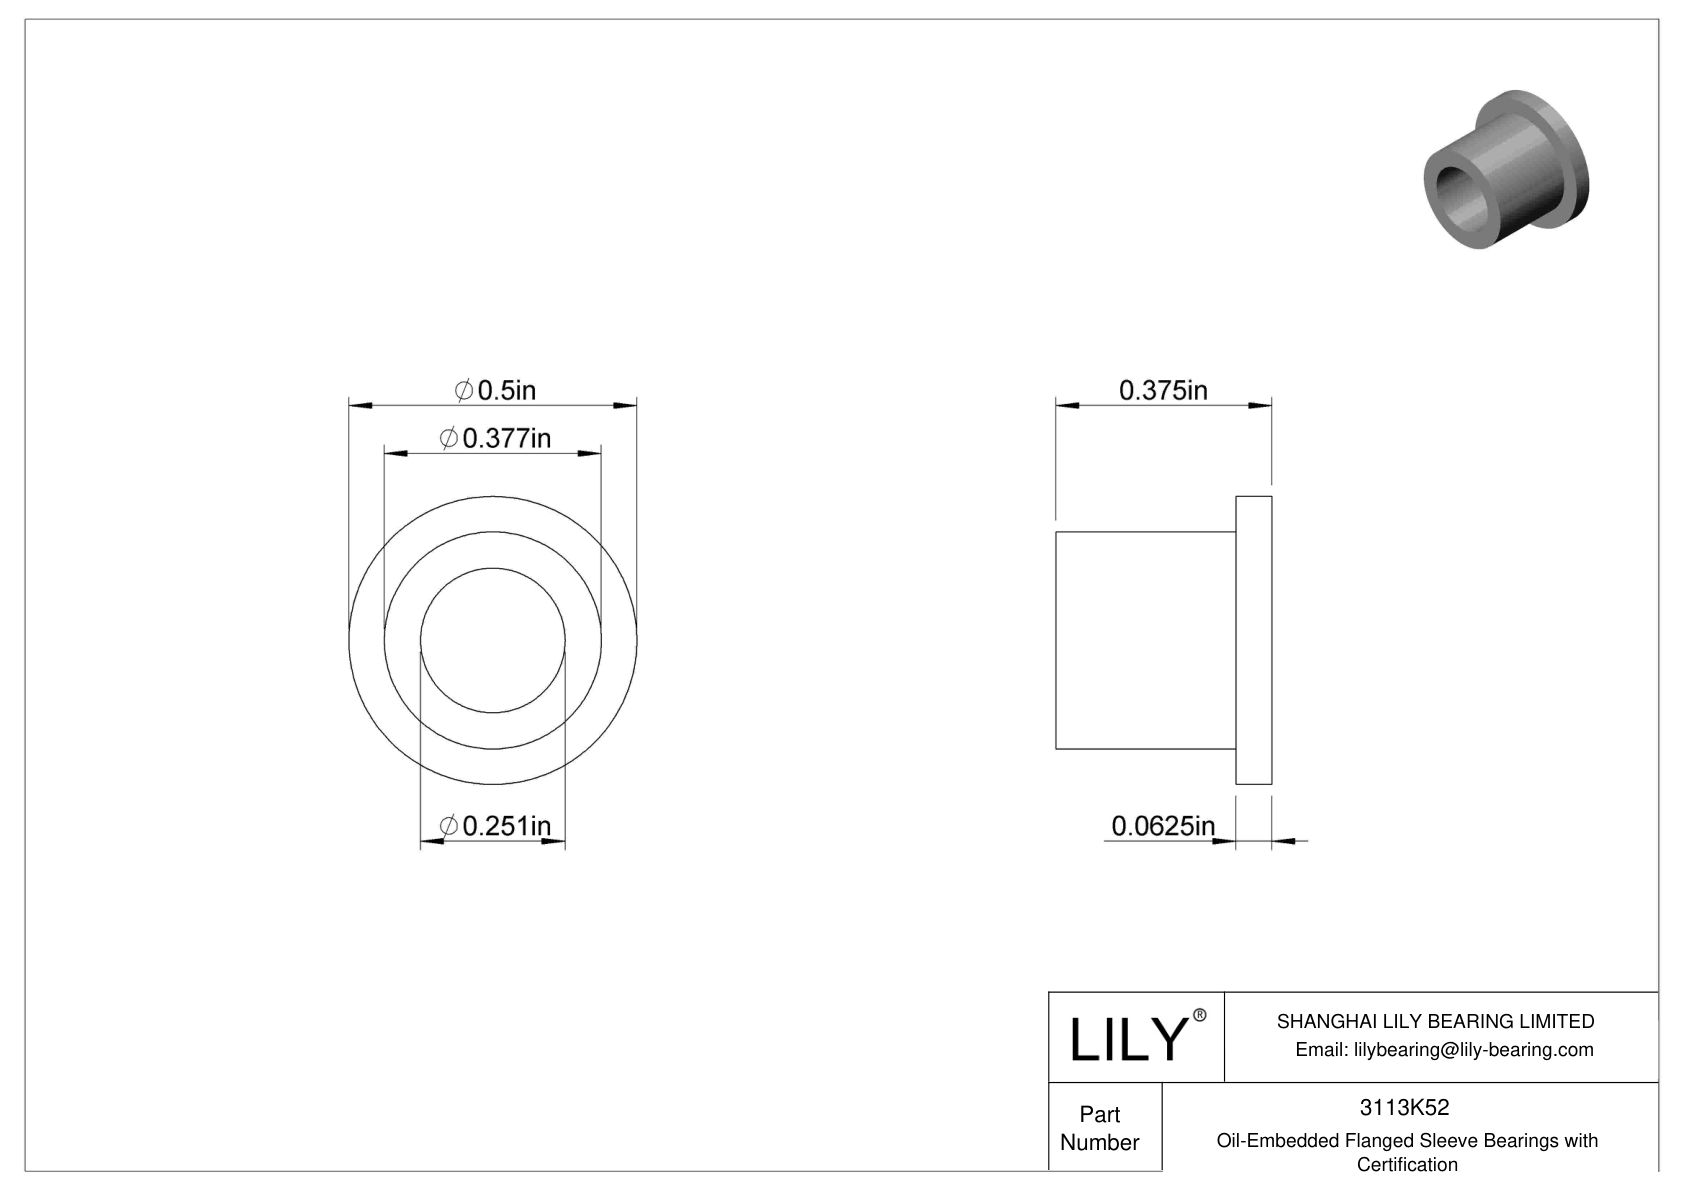 DBBDKFC Oil-Embedded Flanged Sleeve Bearings with Certification cad drawing